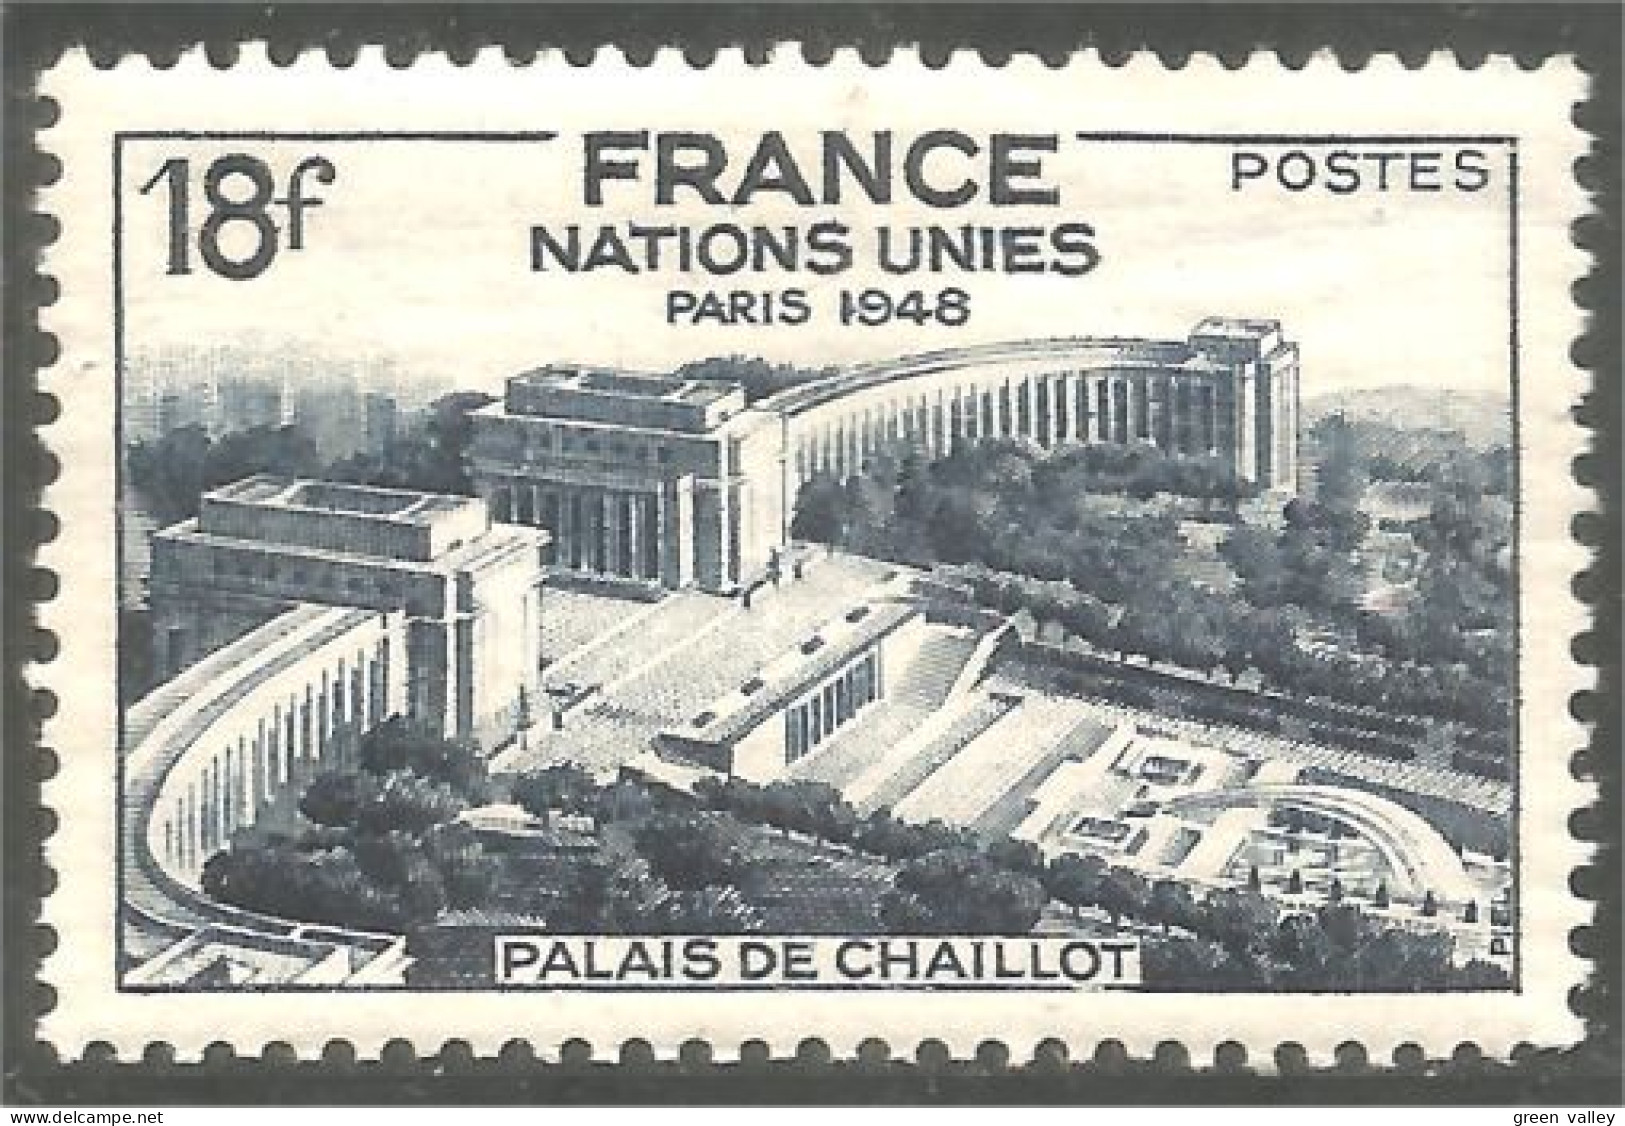 338 France Yv 819 United Nations Unies Palais Chaillot 18f MNH ** Neuf SC (819-1c) - UNO